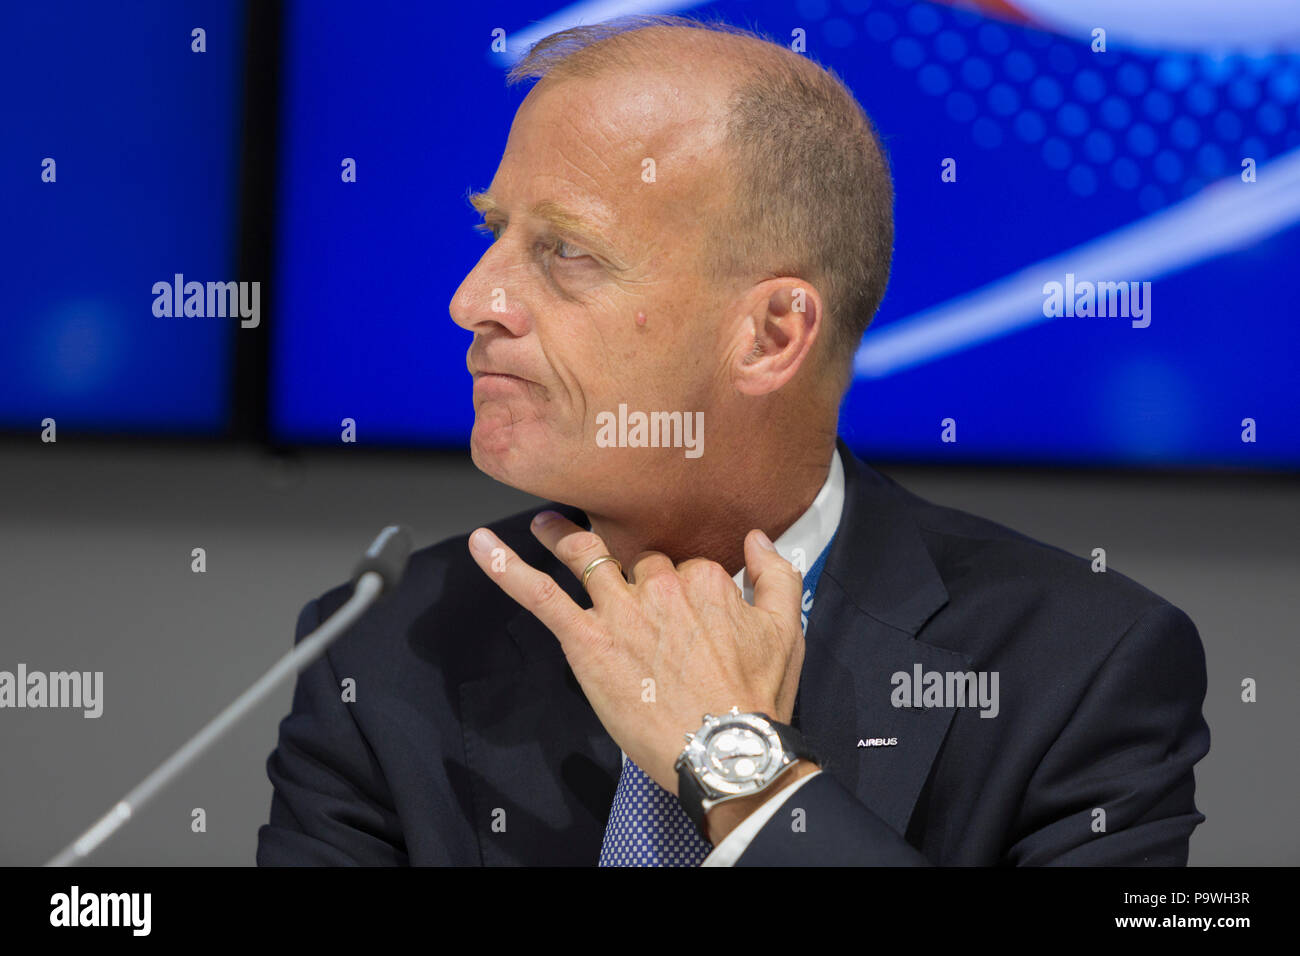 The CEO of Airbus Industries, Tom Enders at the Farnborough Airshow, on 18th July 2018, in Farnborough, England. Stock Photo